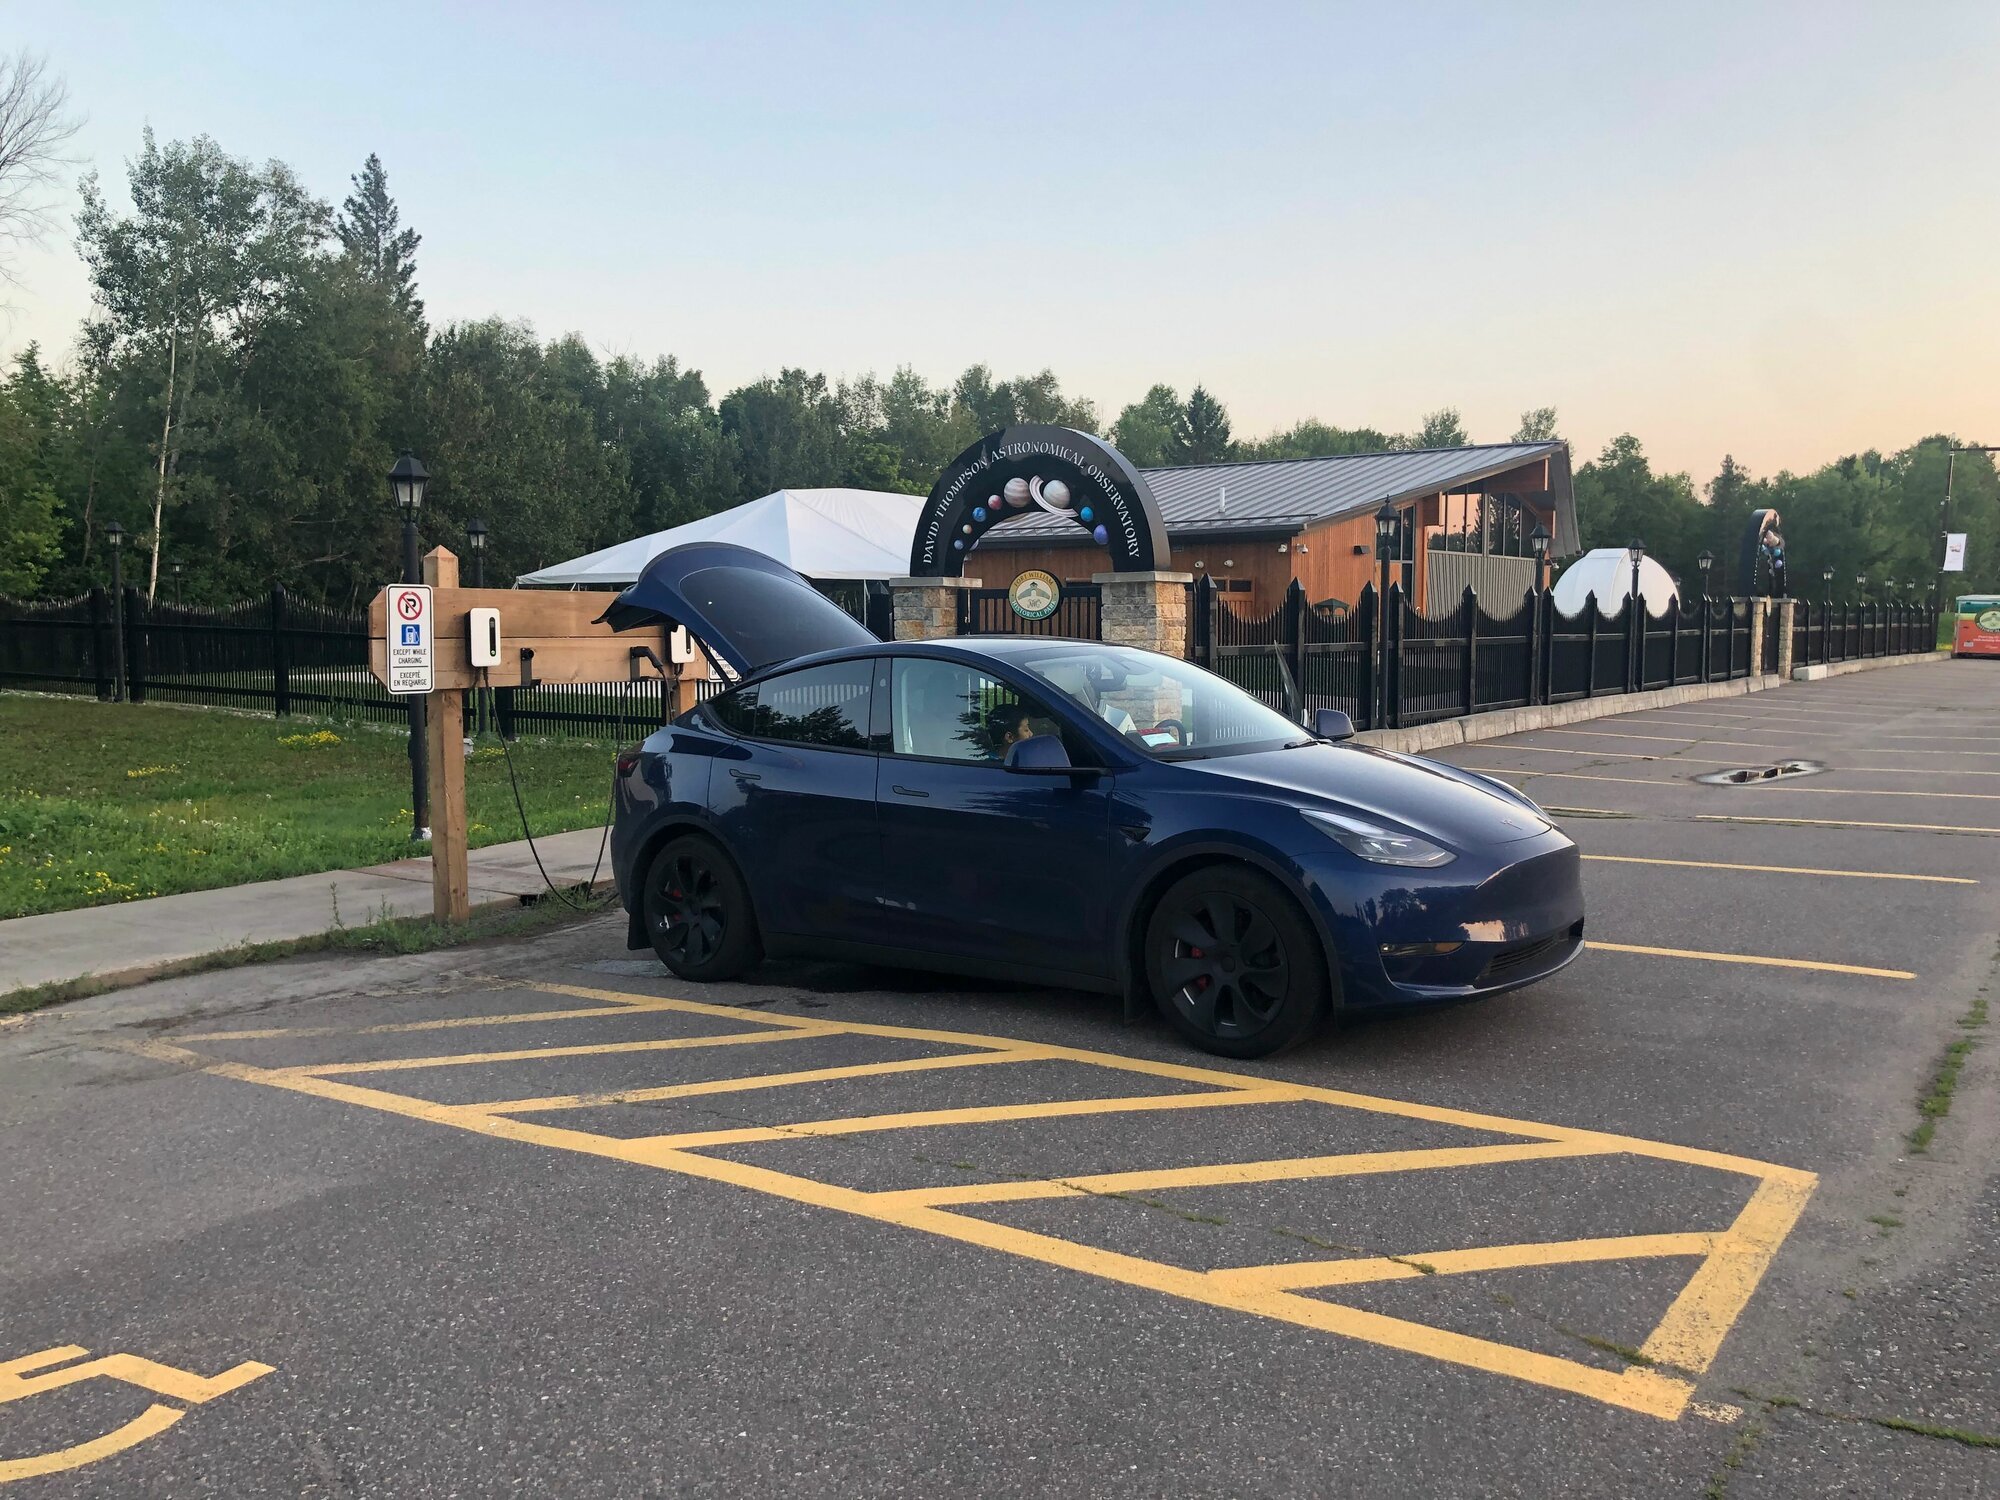 Midnight charging in Canada